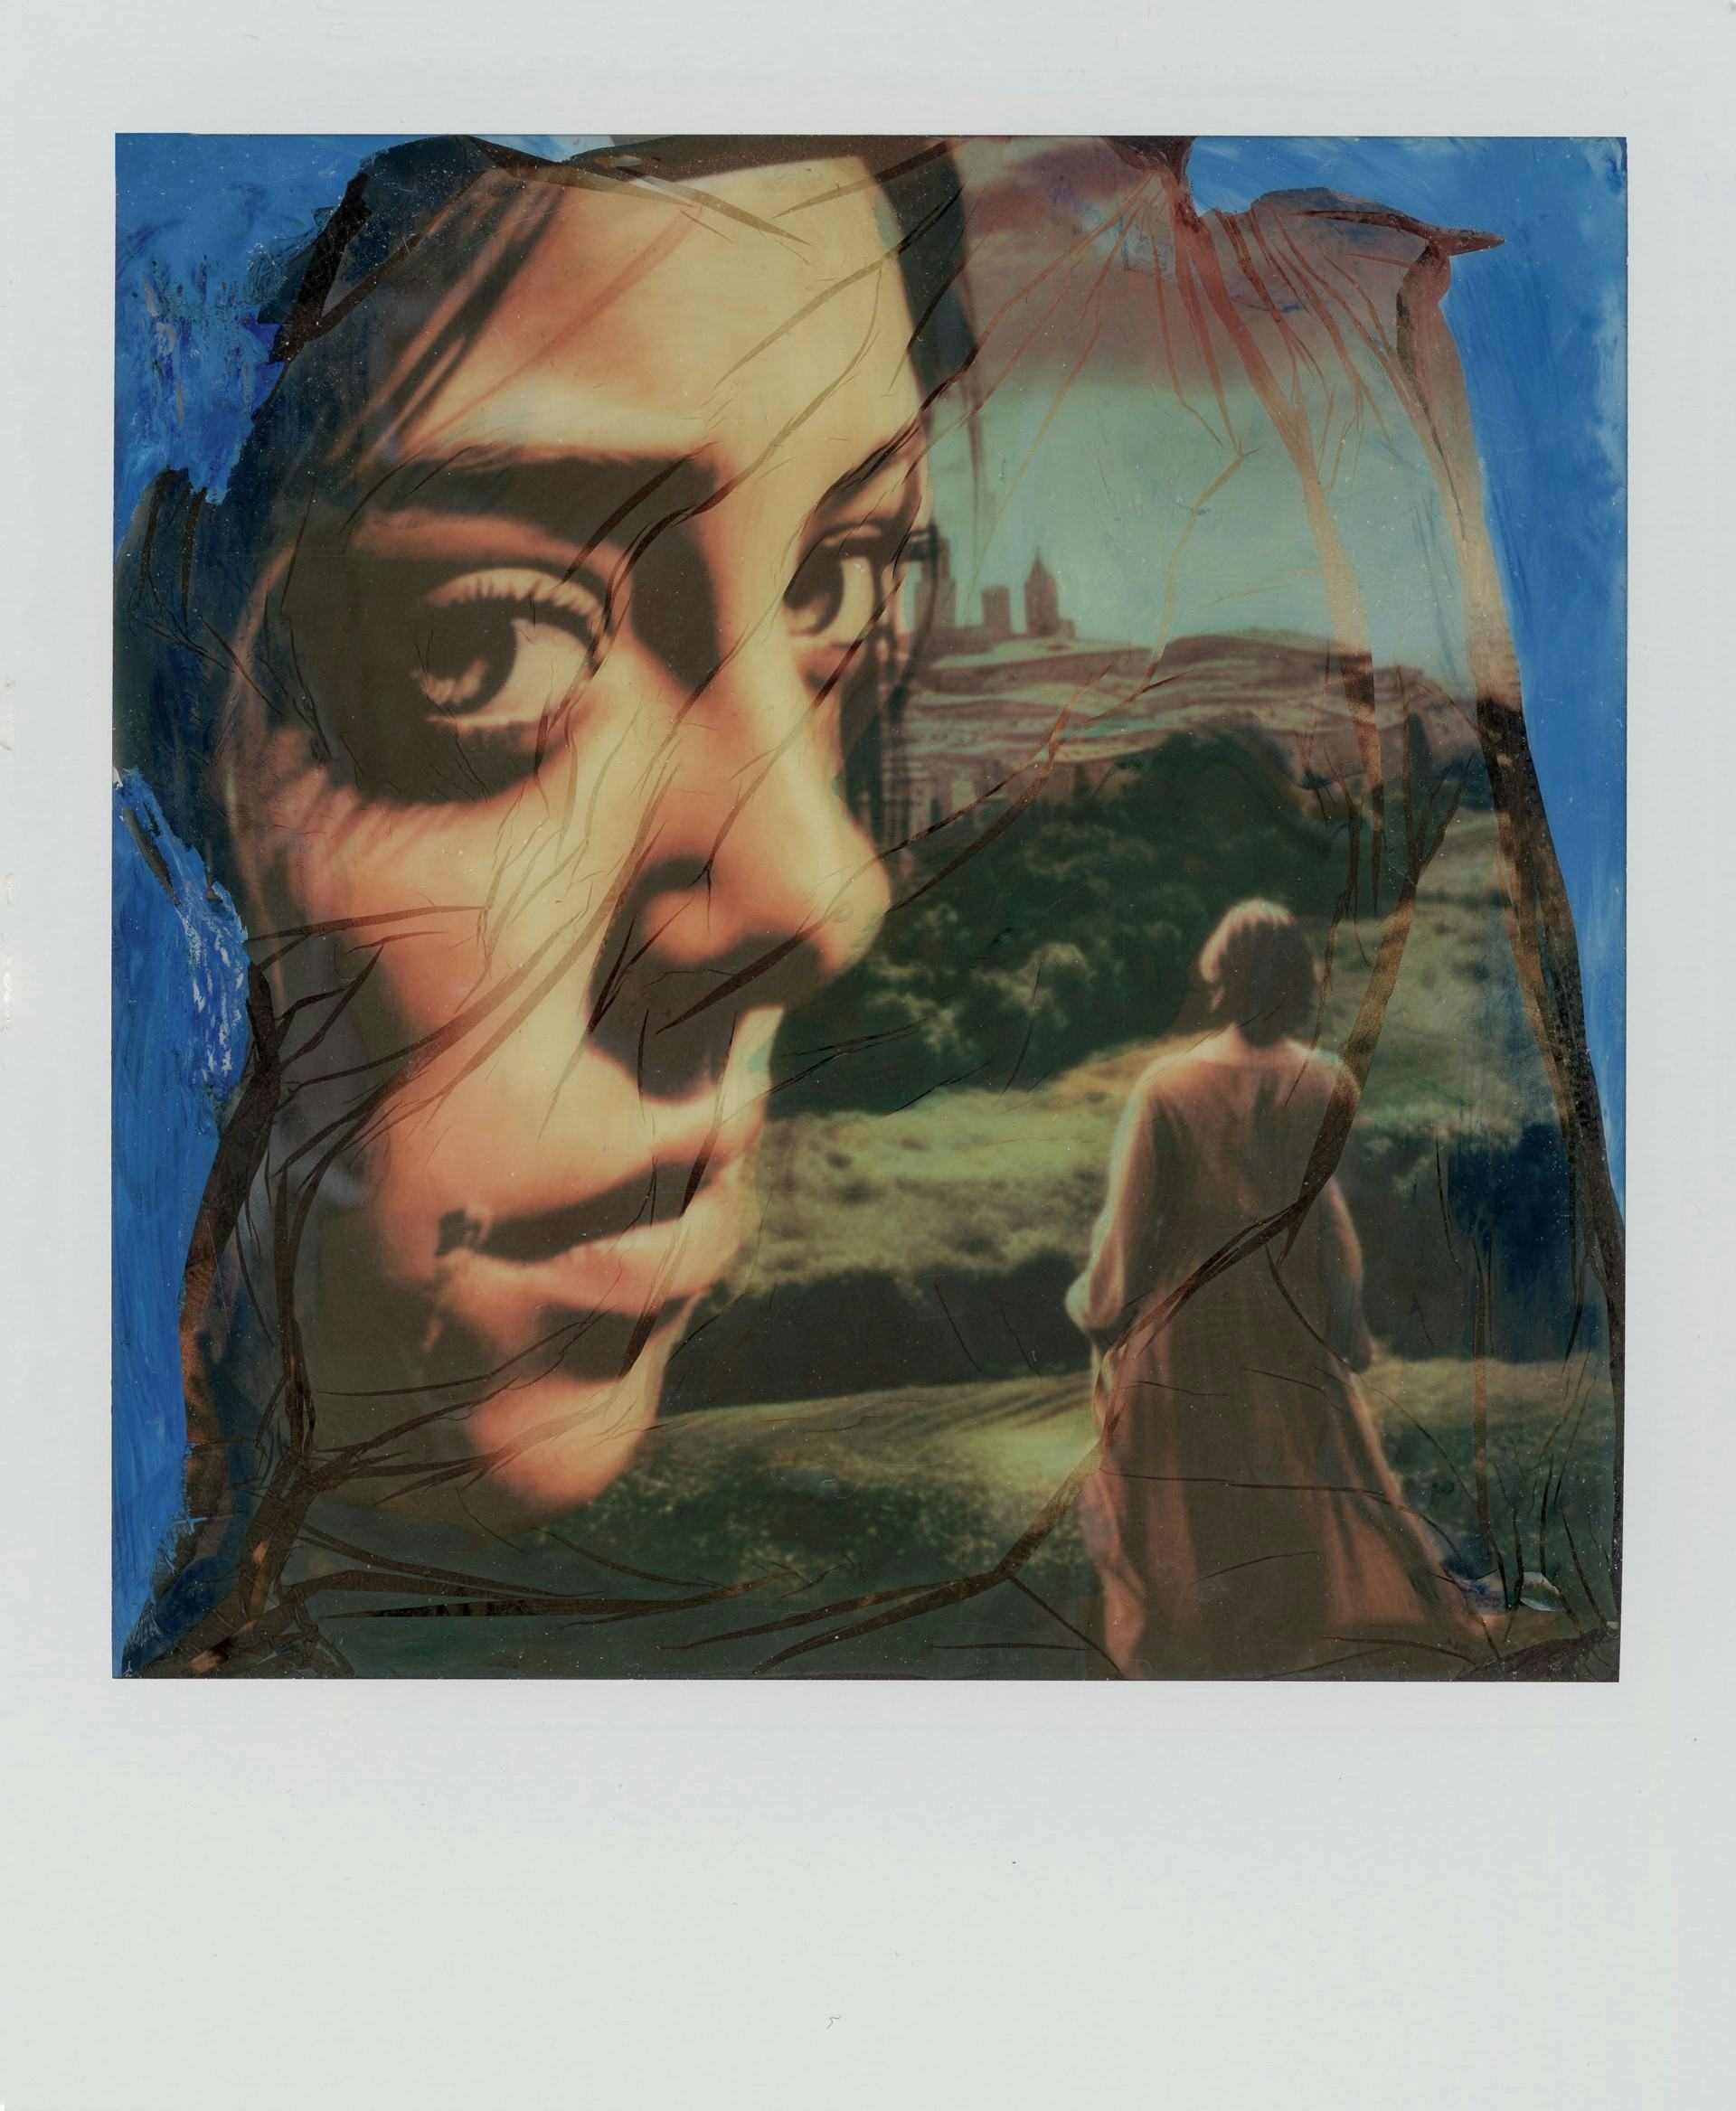 edited polaroid of a woman's face superimposed on a Tuscan landscape